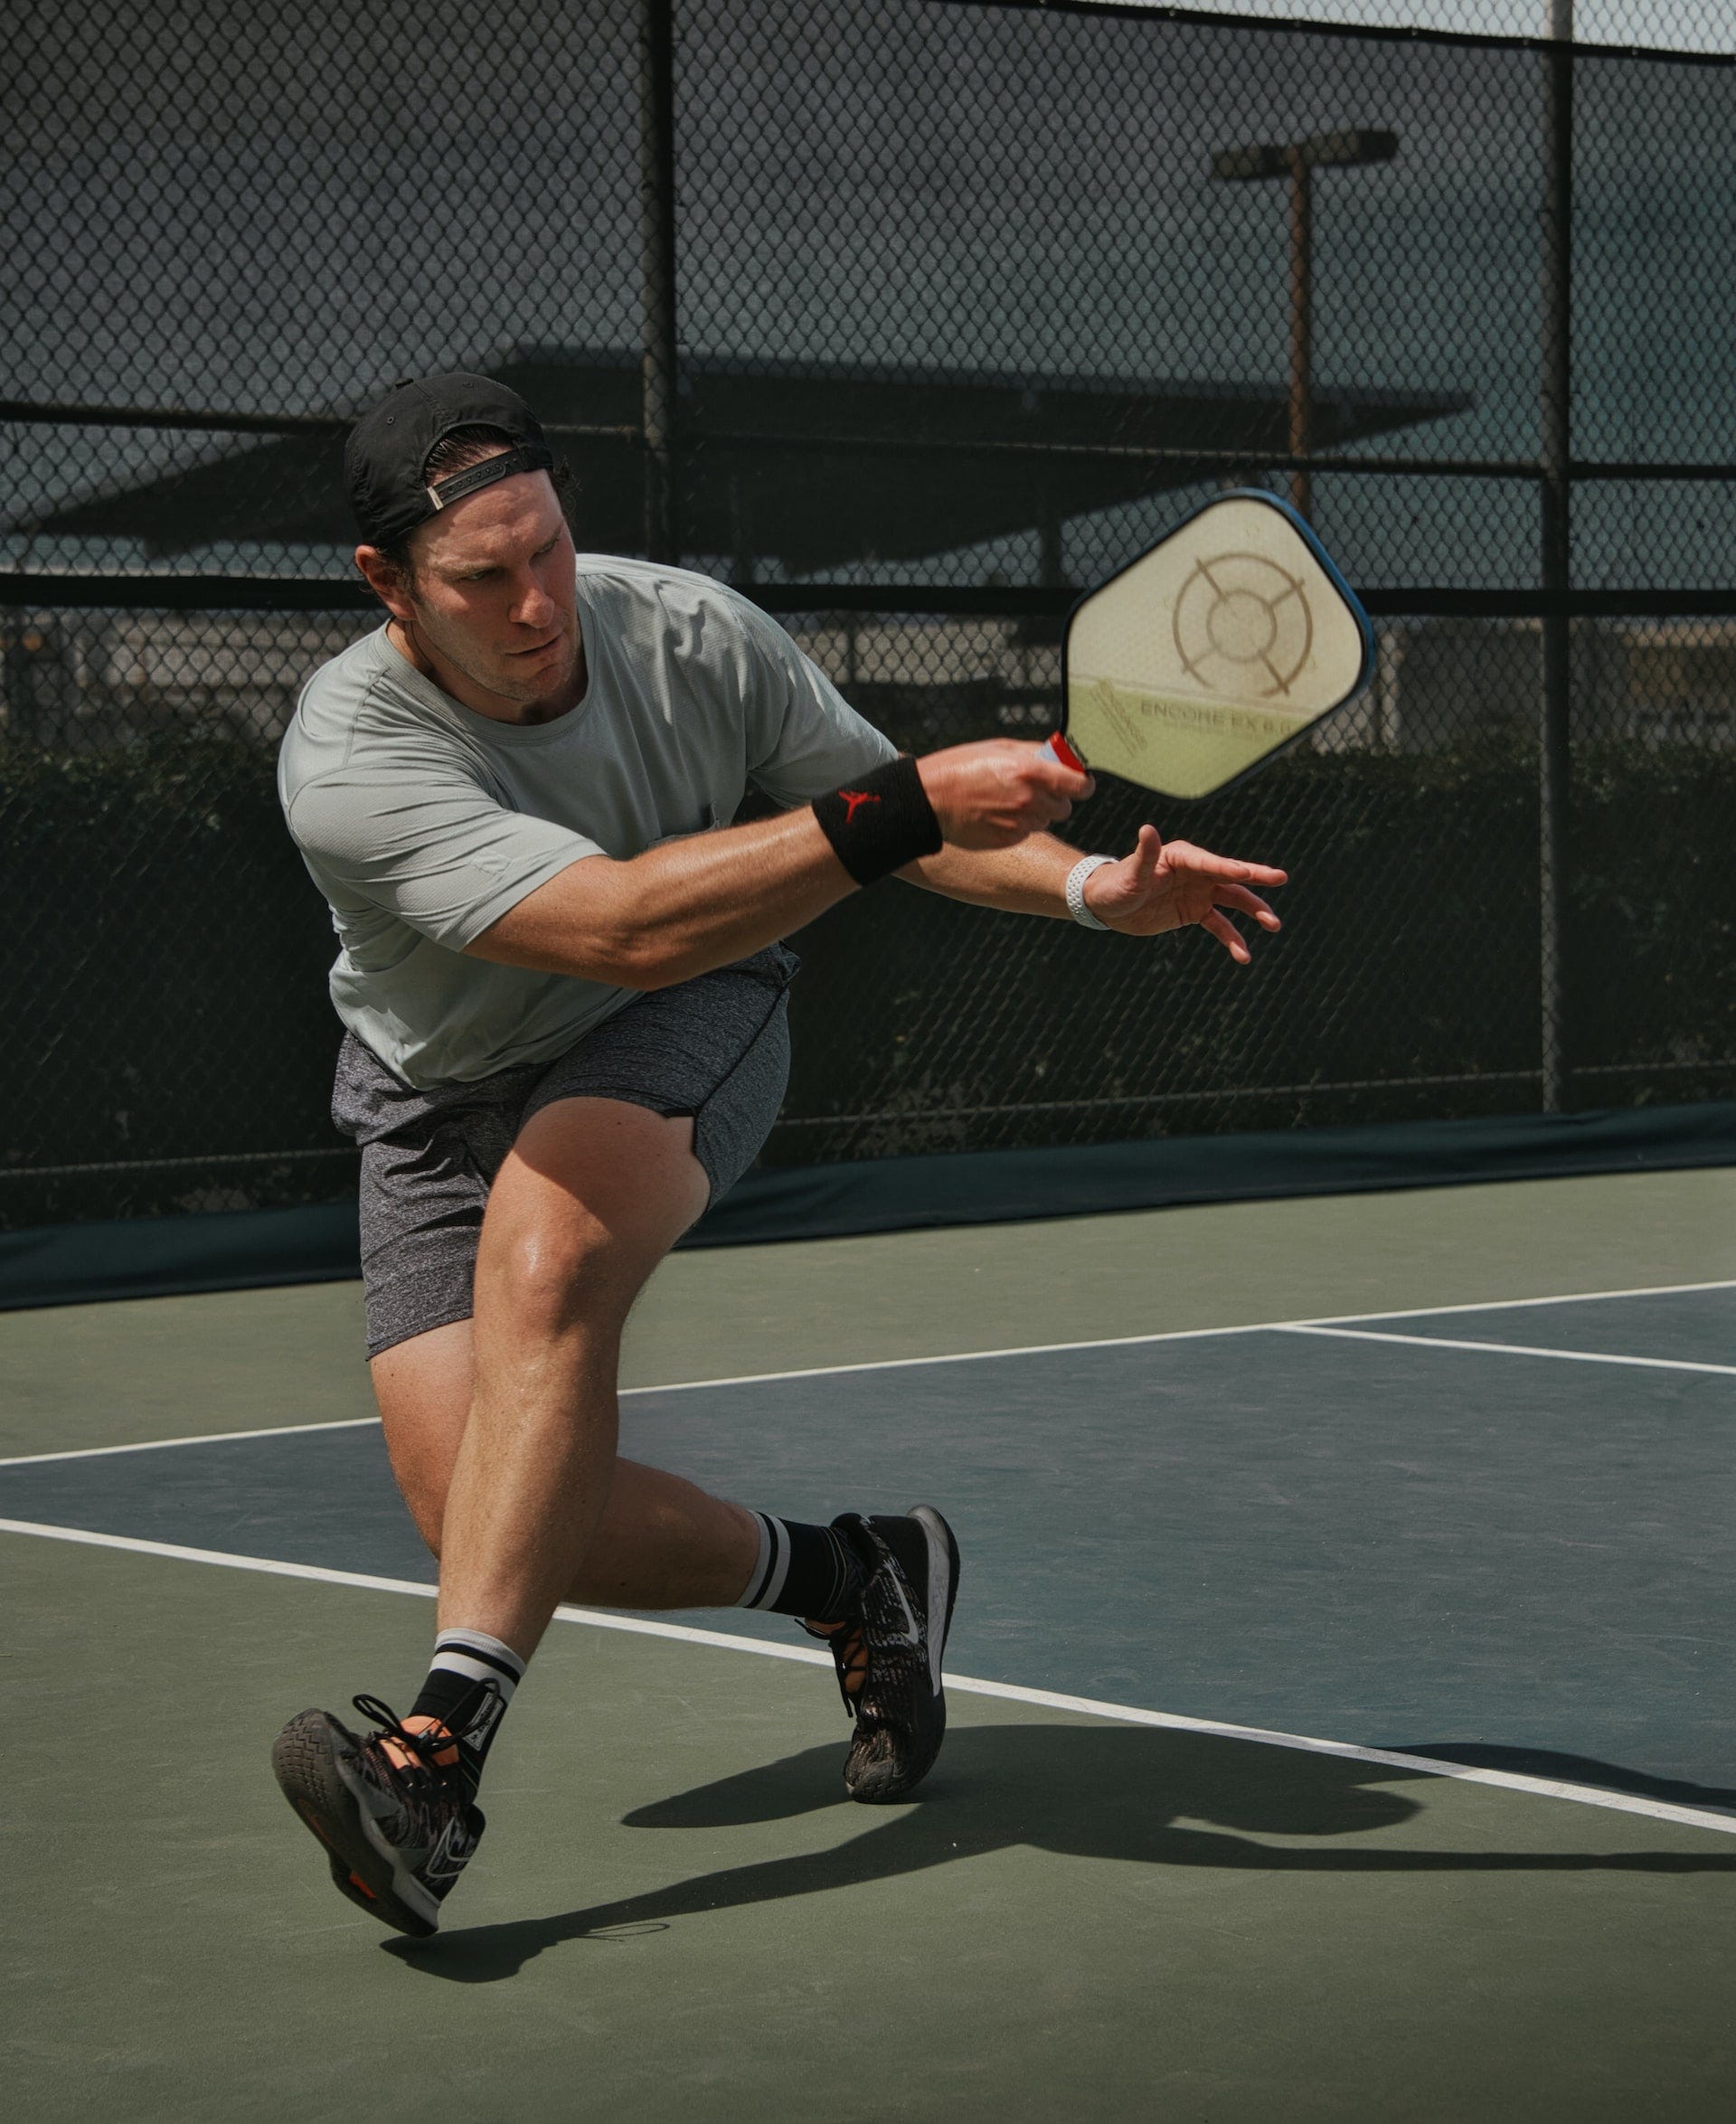 An athletic male steps forward while swinging a pickleball paddle.